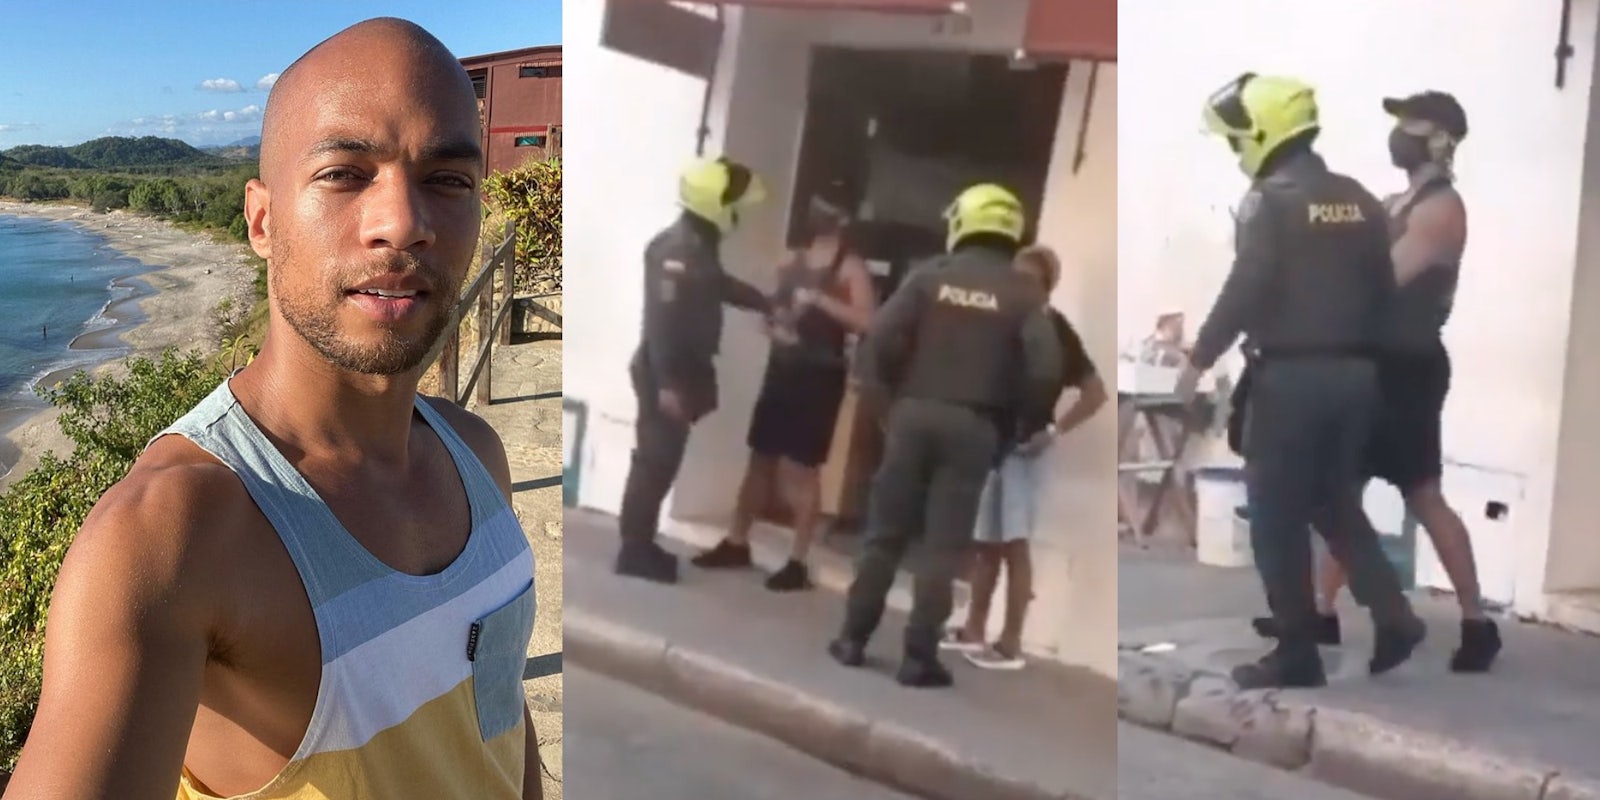 Kendrick Sampson shares video of police punching and pulling a gun on him during arrest in Colombia.